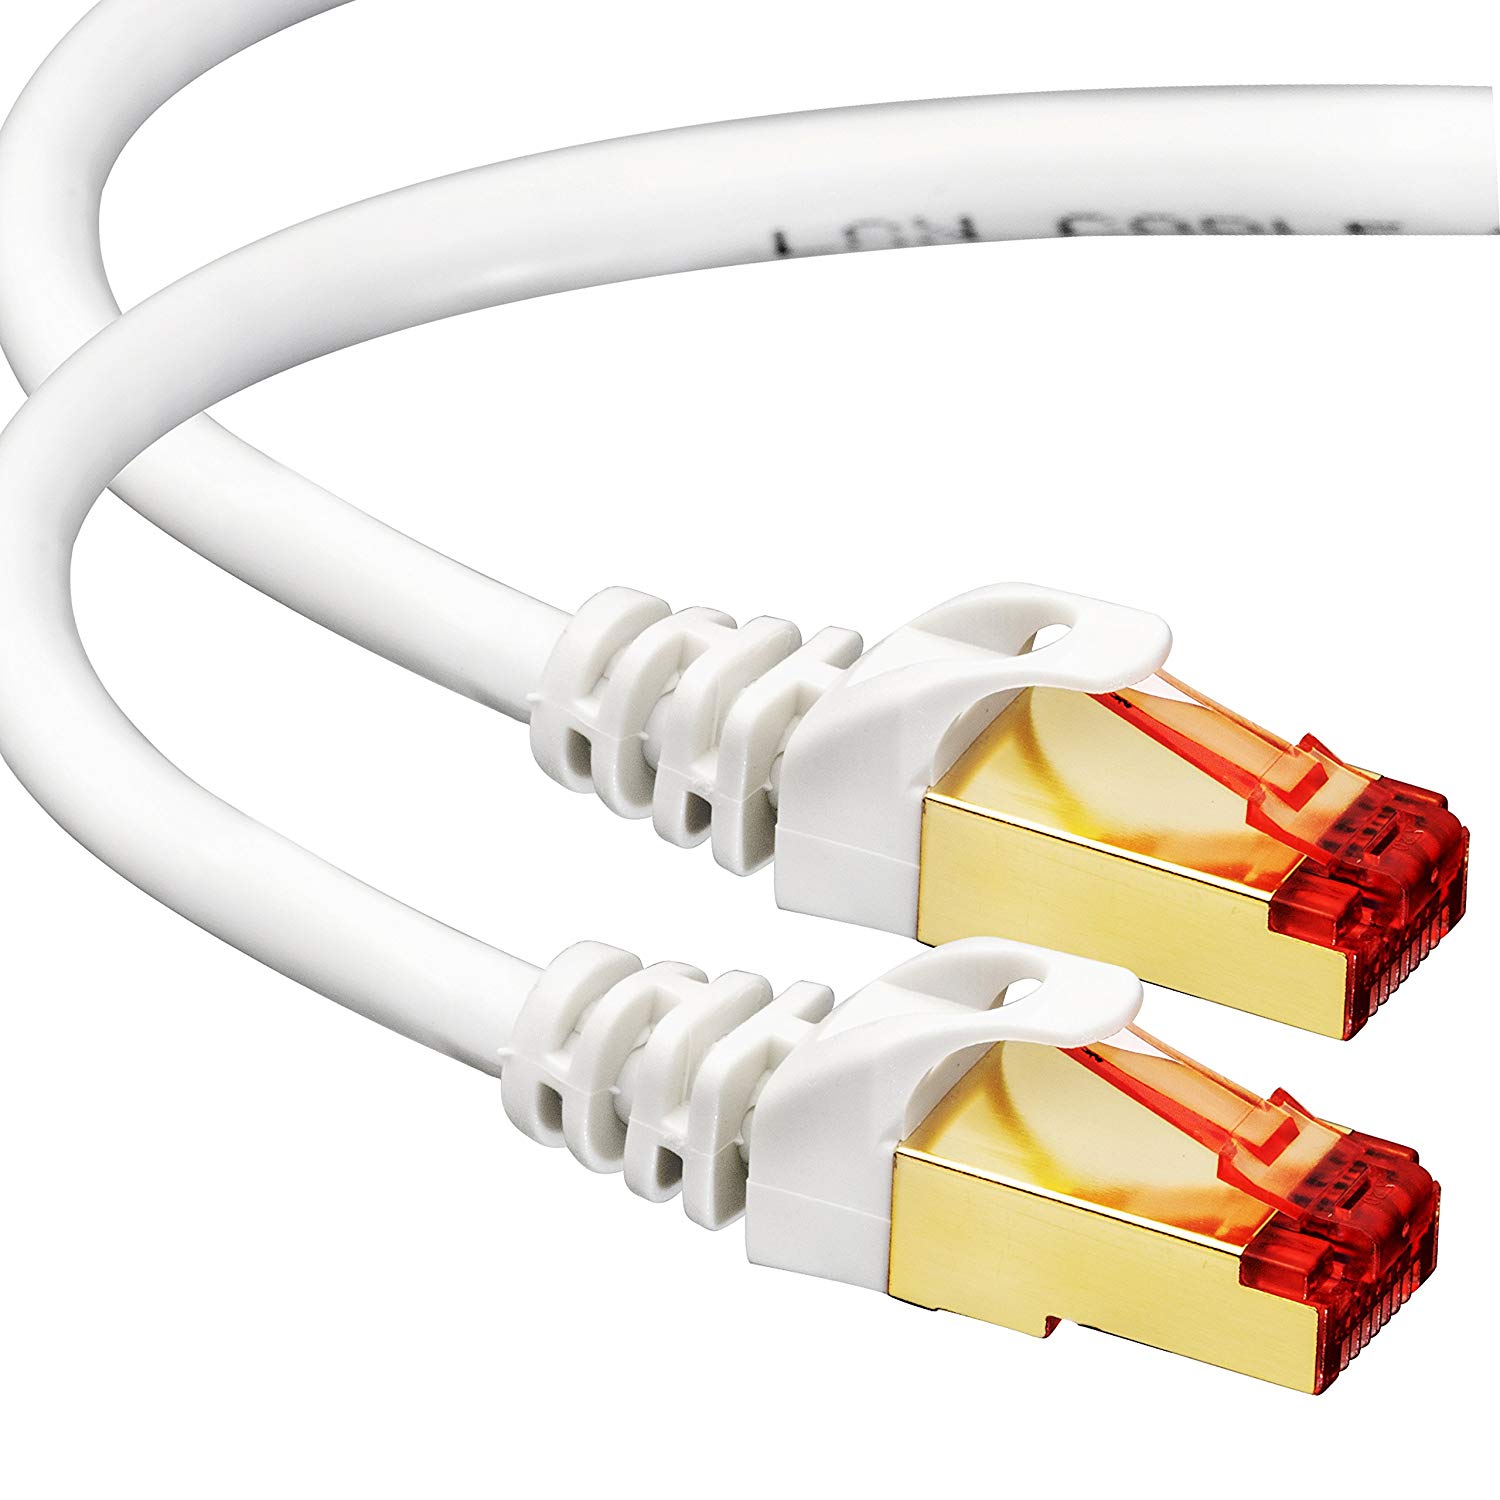 8. Ultra Clarity Cat 7 Ethernet cable